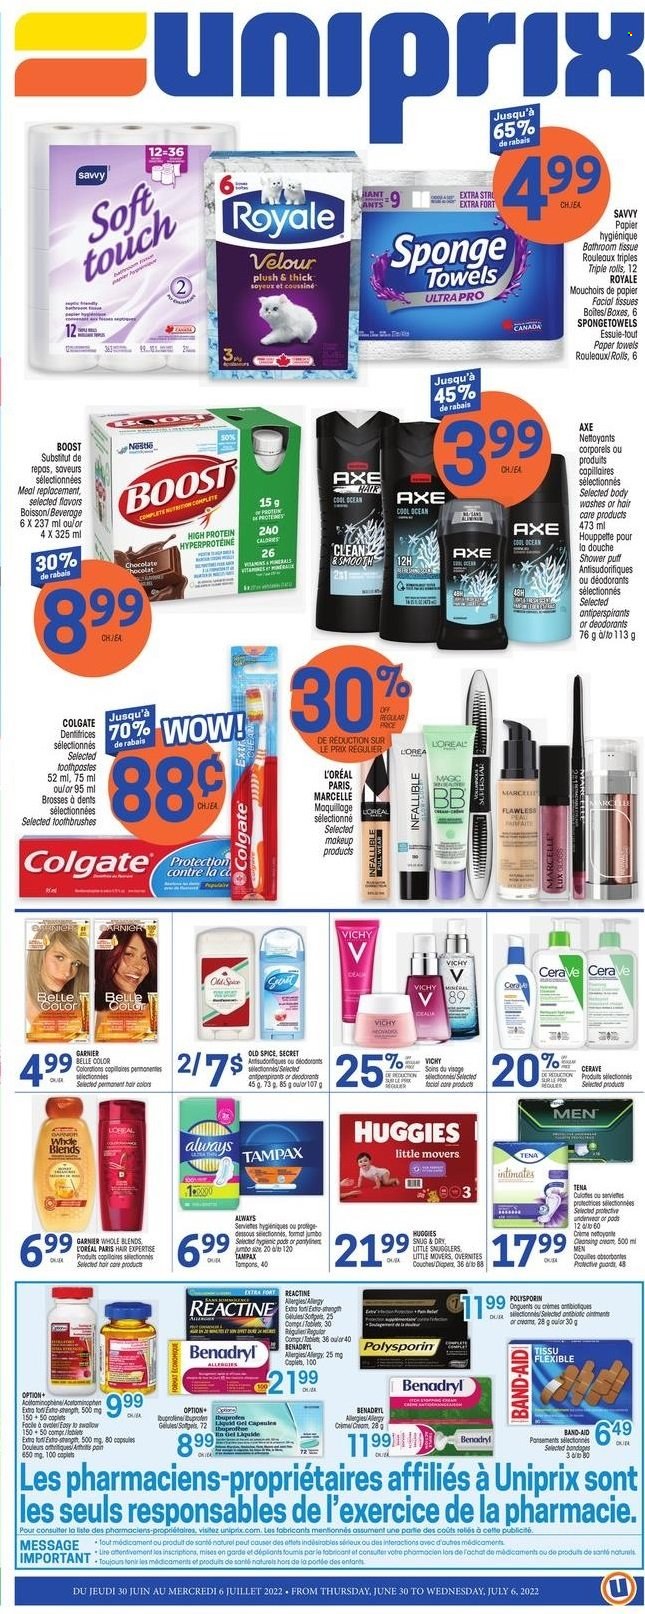 thumbnail - Uniprix Flyer - June 30, 2022 - July 06, 2022 - Sales products - chocolate, spice, Boost, nappies, kitchen towels, paper towels, Vichy, CeraVe, L’Oréal, Sure, Axe, makeup, Ibuprofen, band-aid, Colgate, Garnier, Tampax, Huggies, Old Spice, deodorant. Page 1.